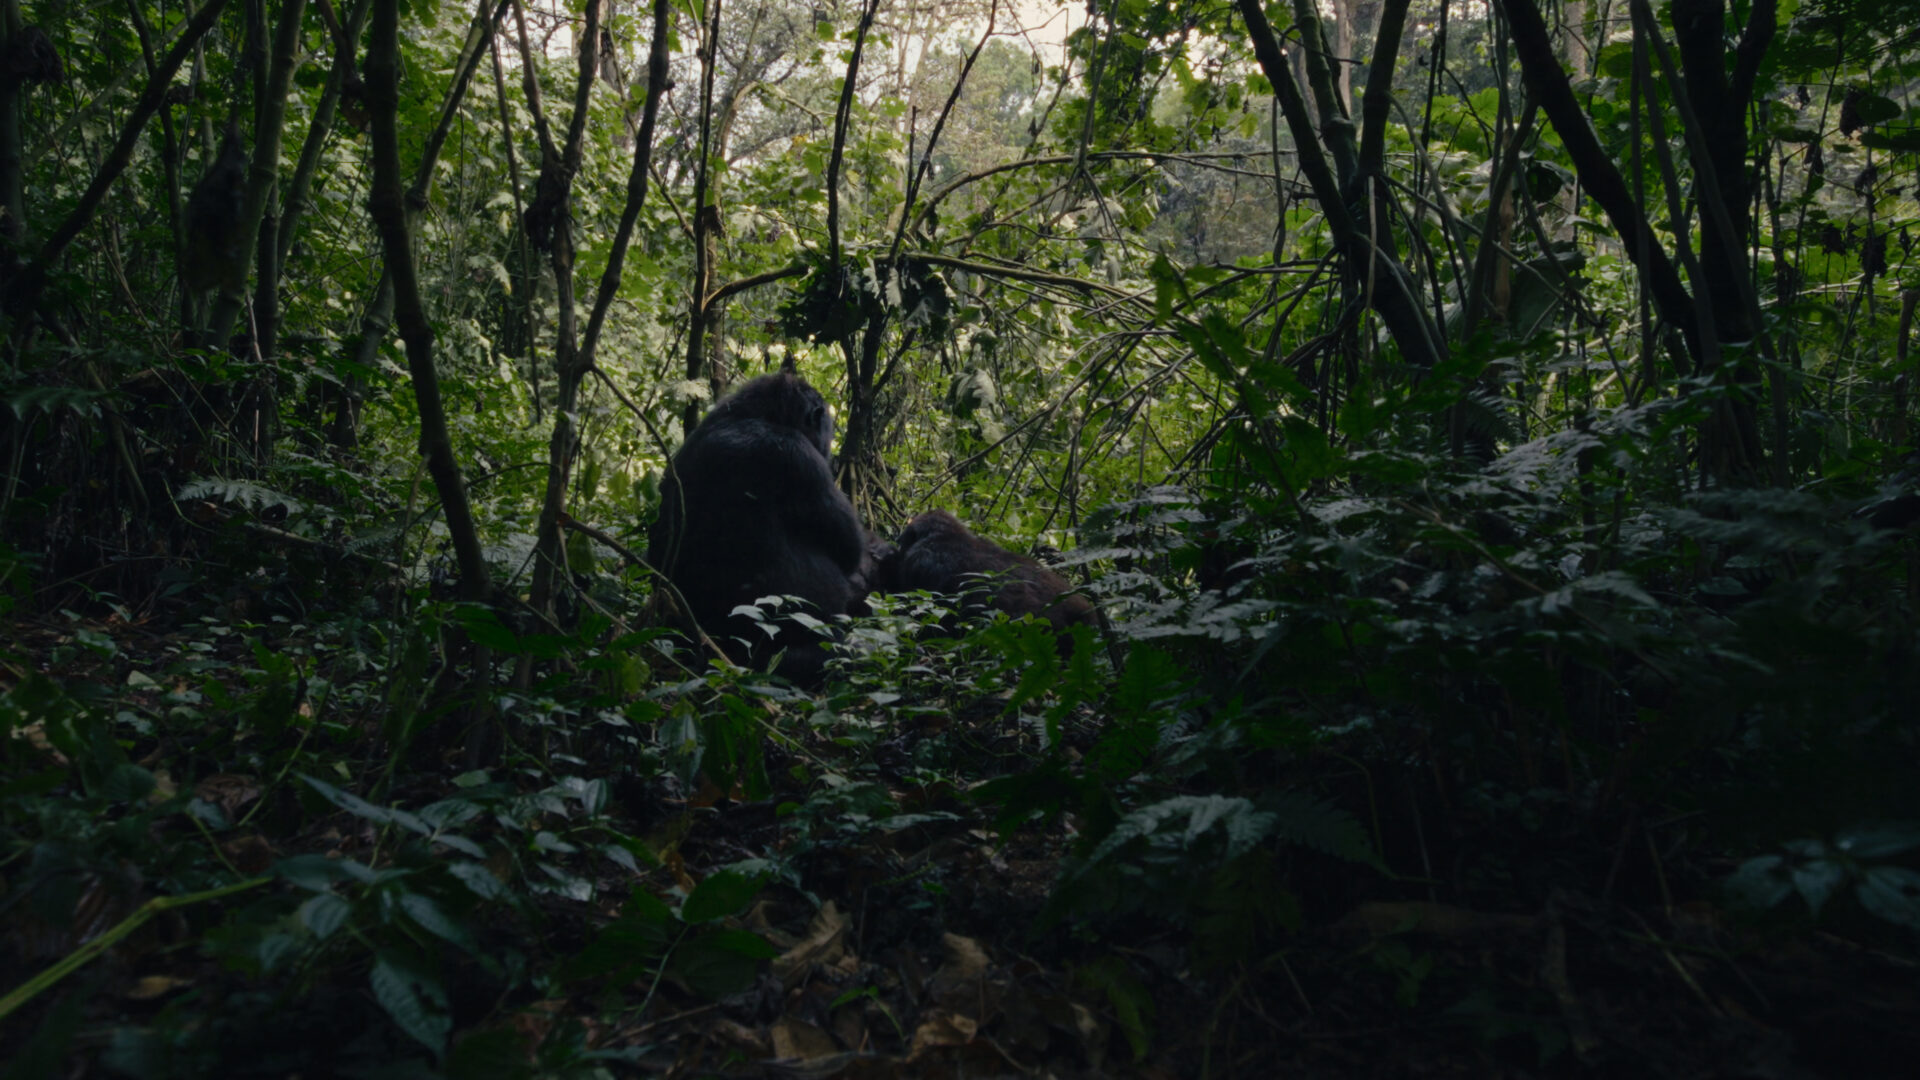 Two great apes sit in forest